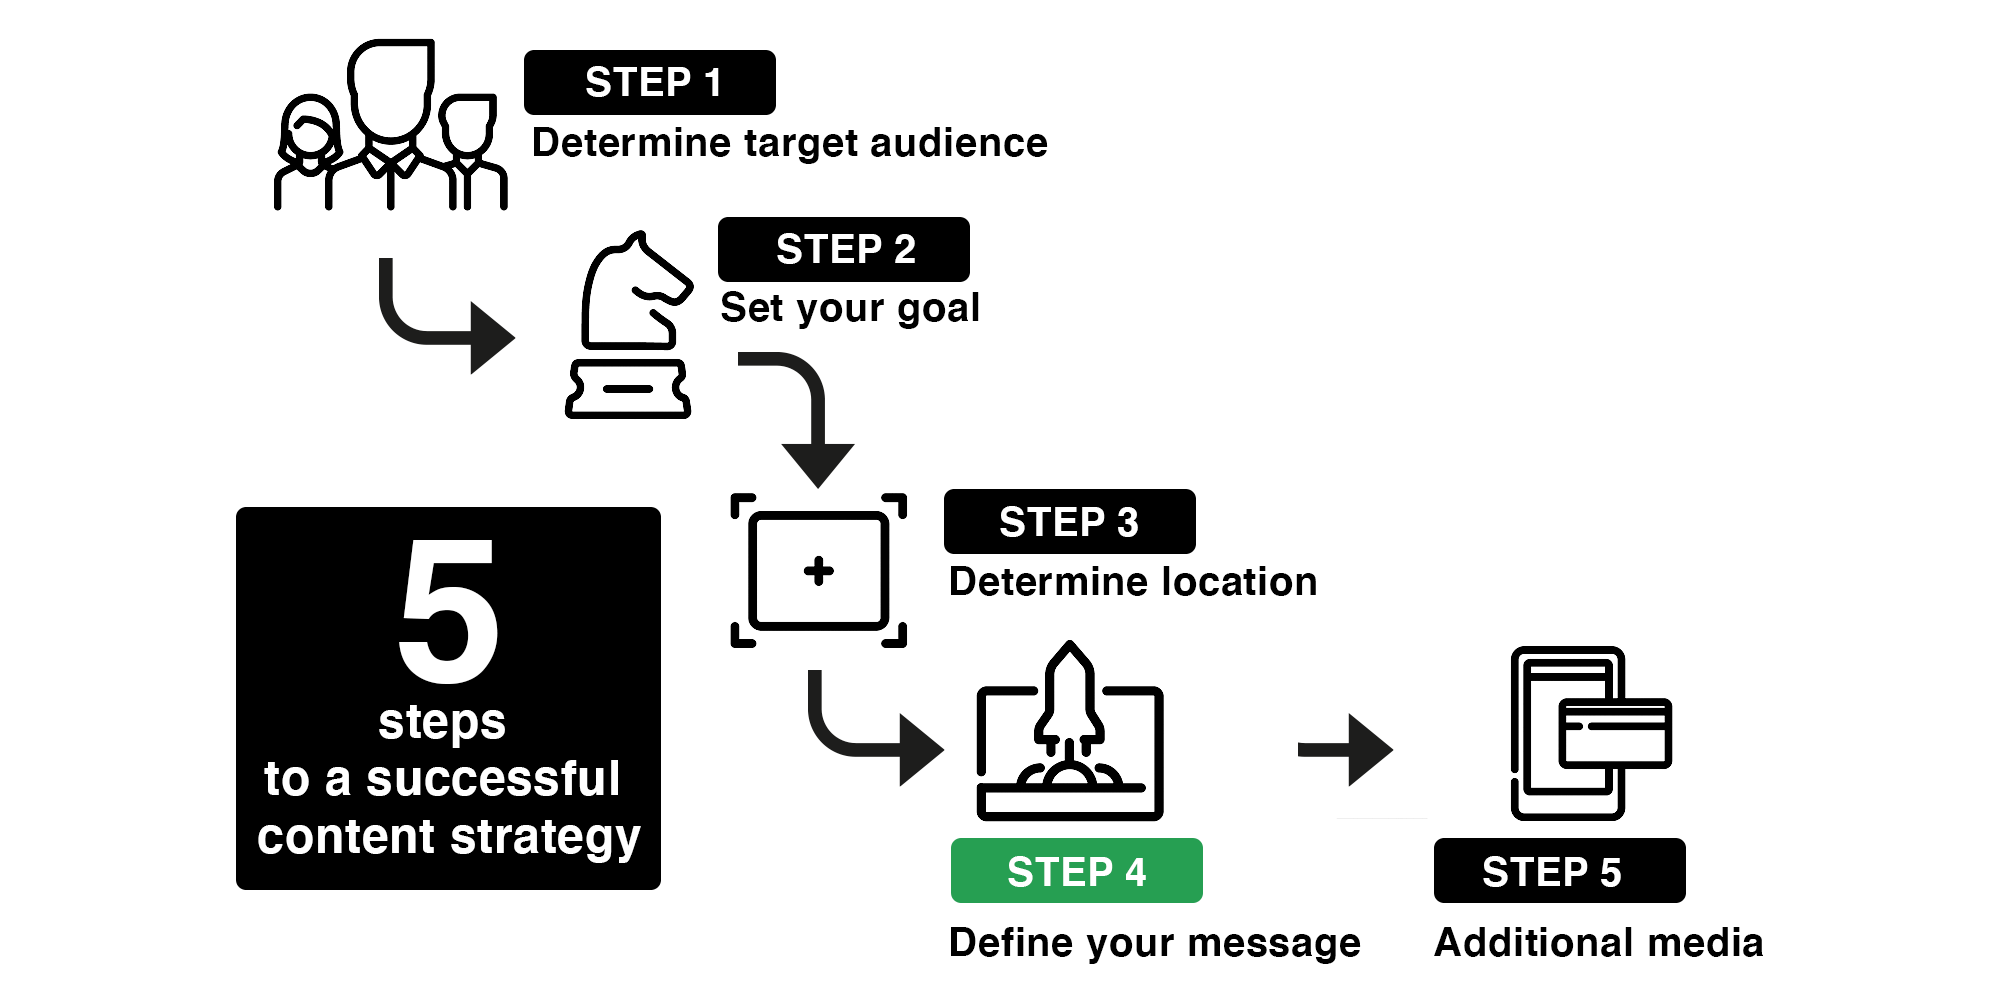 Step 4 of creating a Content Strategy in 5 steps